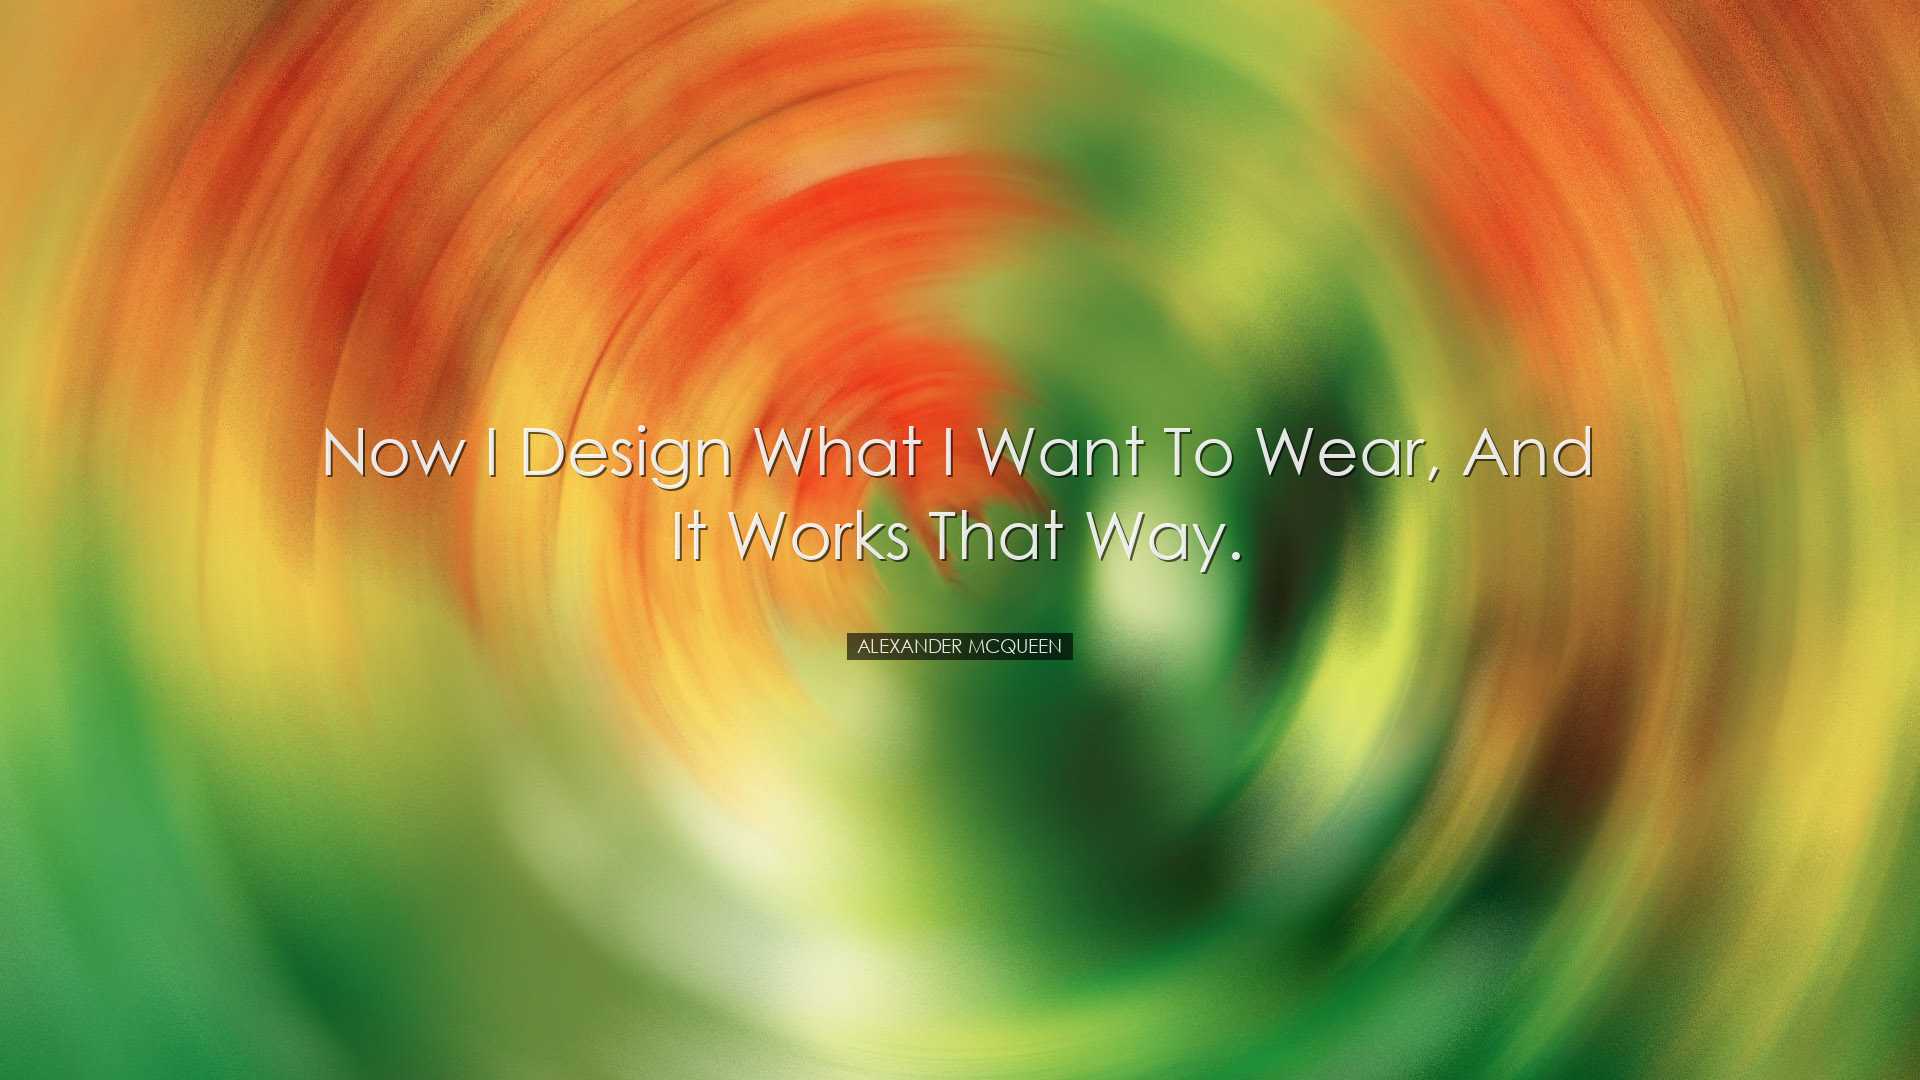 Now I design what I want to wear, and it works that way. - Alexand